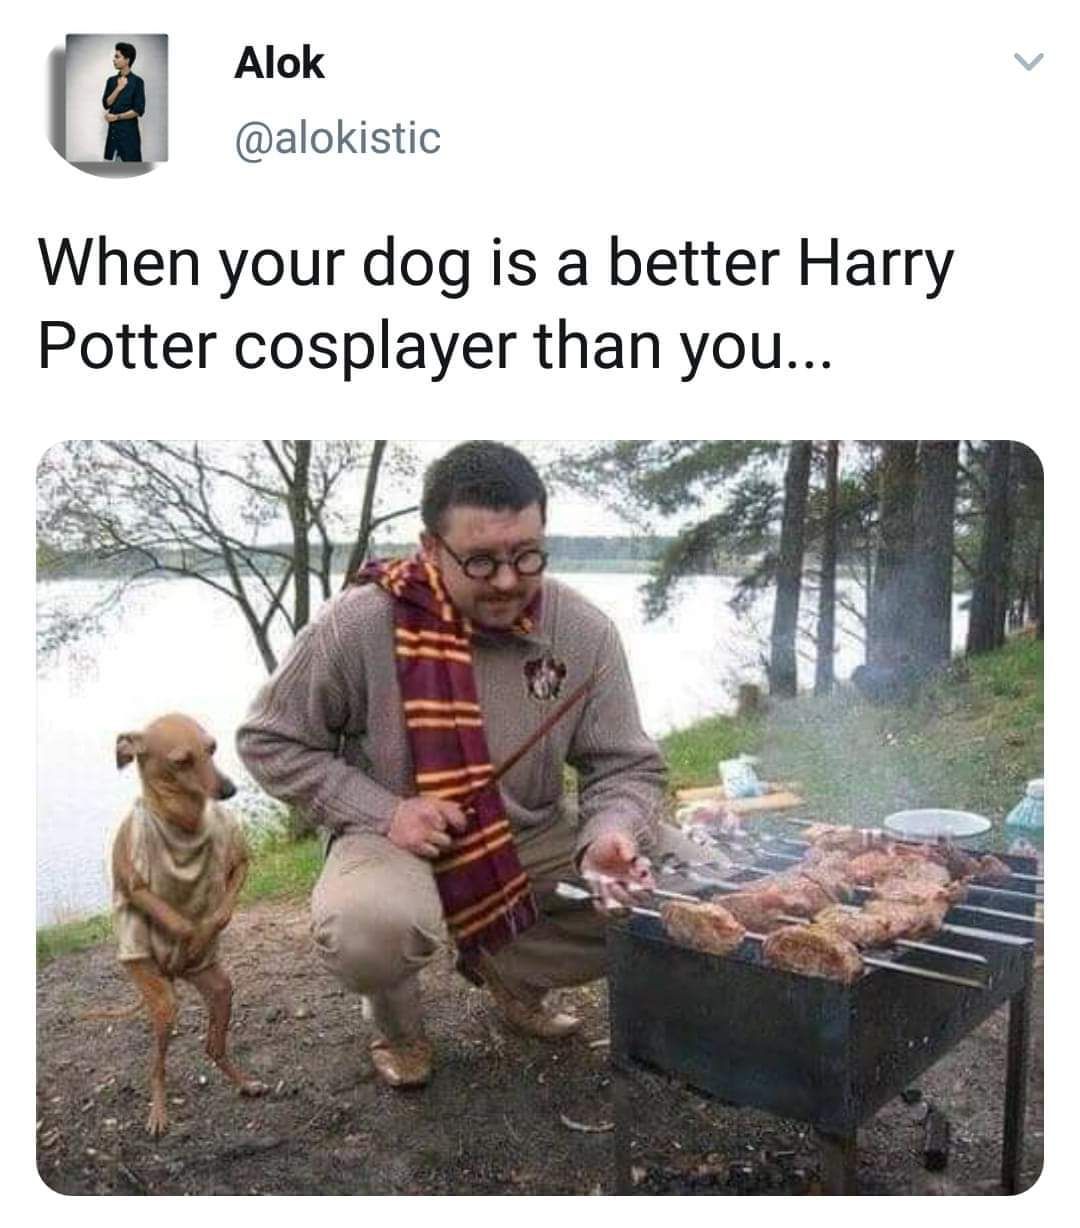 Harry Potter and Dobby enjoying a quiet BBQ